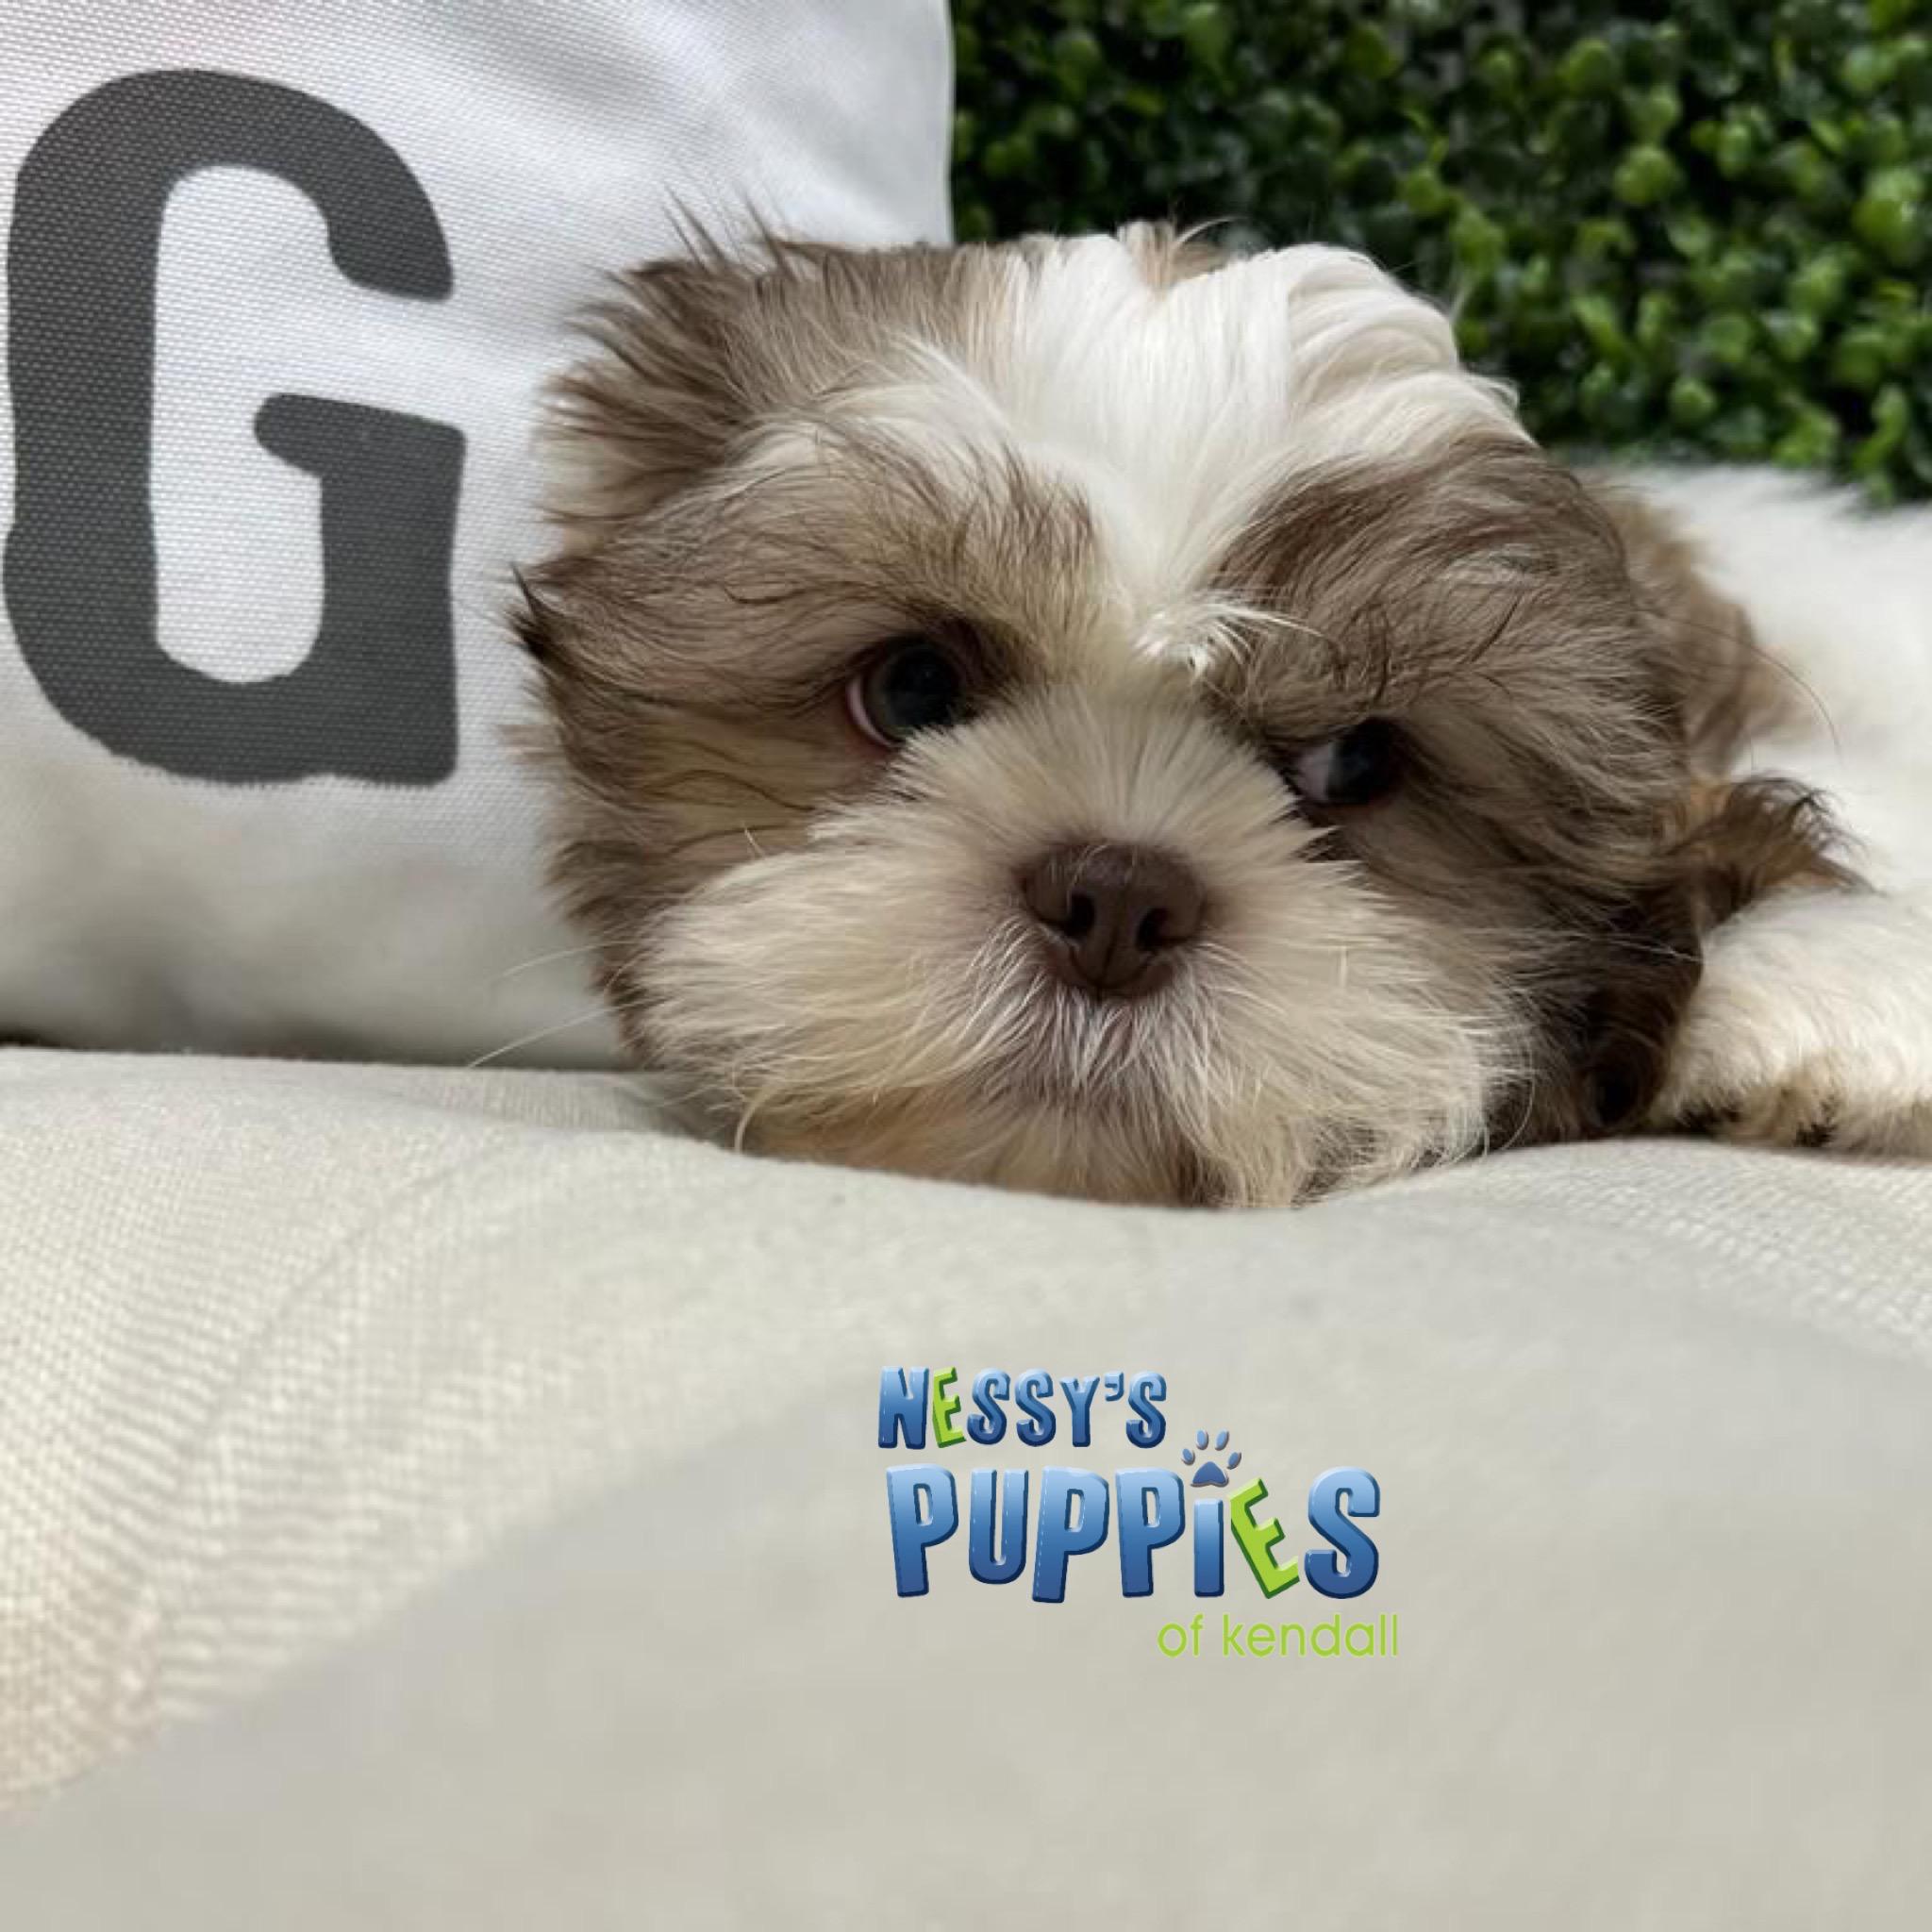 Nessy's Puppies of Kendall